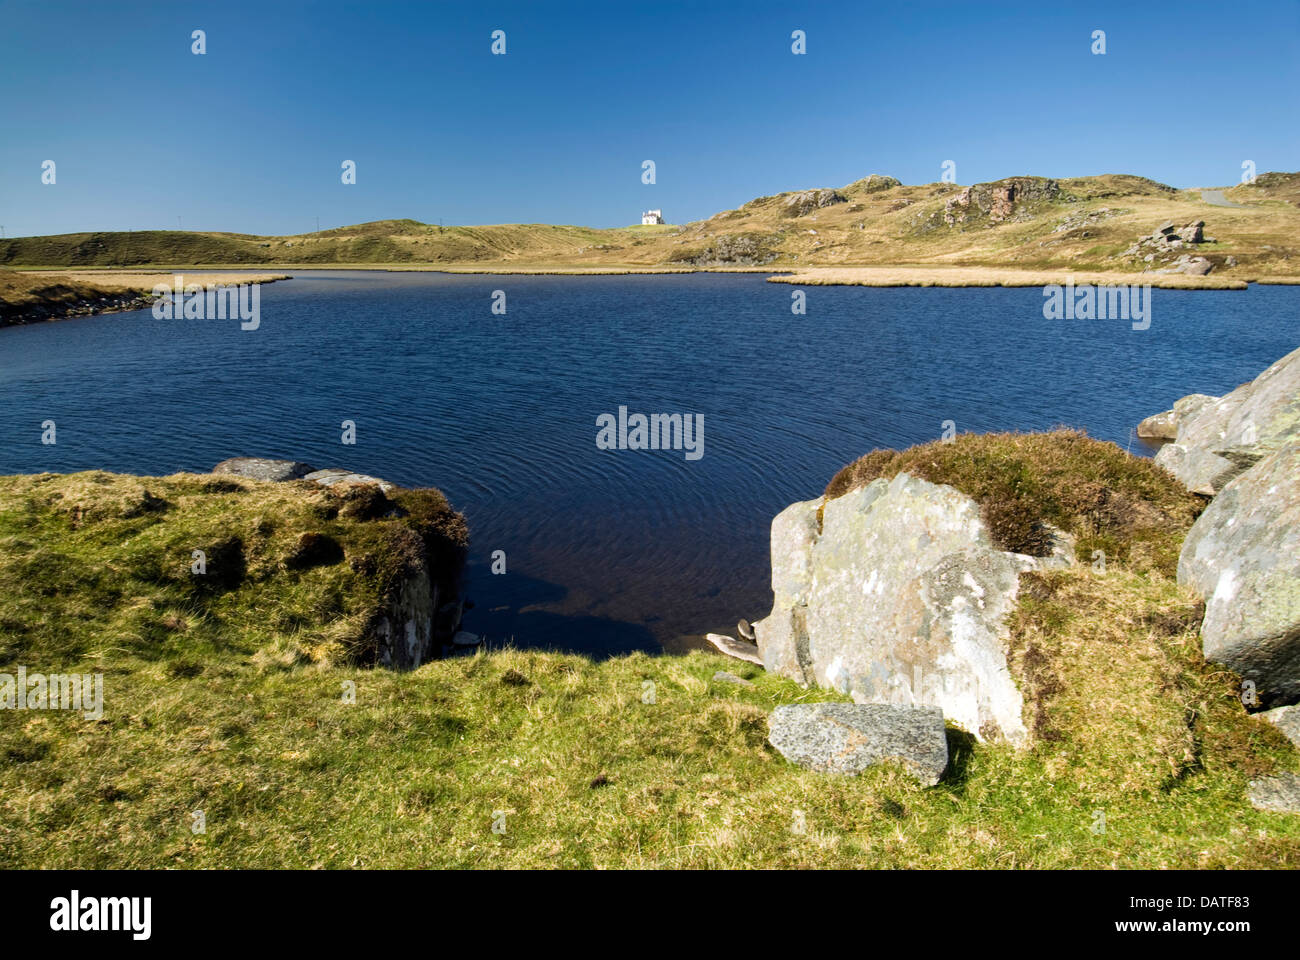 Loch Ceann Hulabhaig, Callanish, Isle of Lewis, Scotland, UK Overlooking the loch towards one small house. Stock Photo